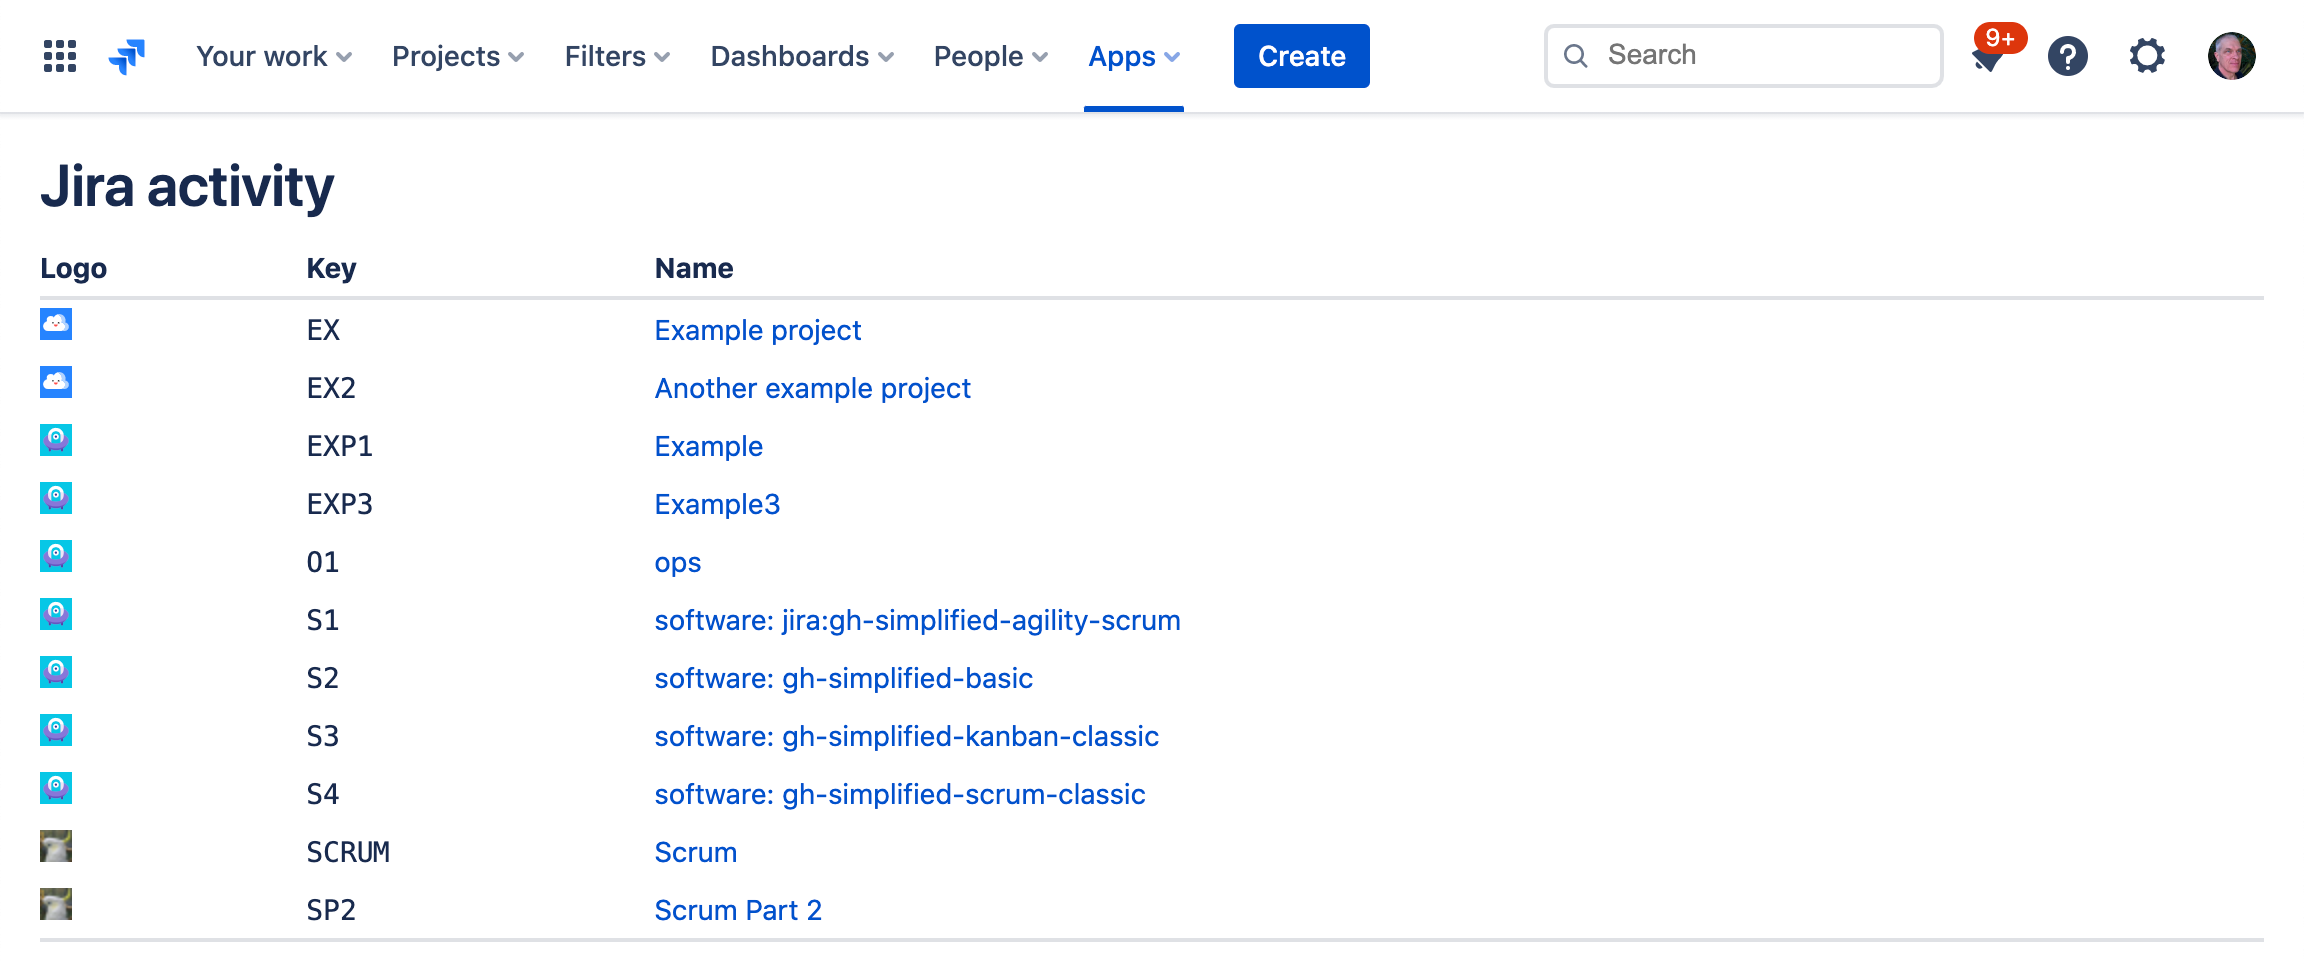 Jira activity completed